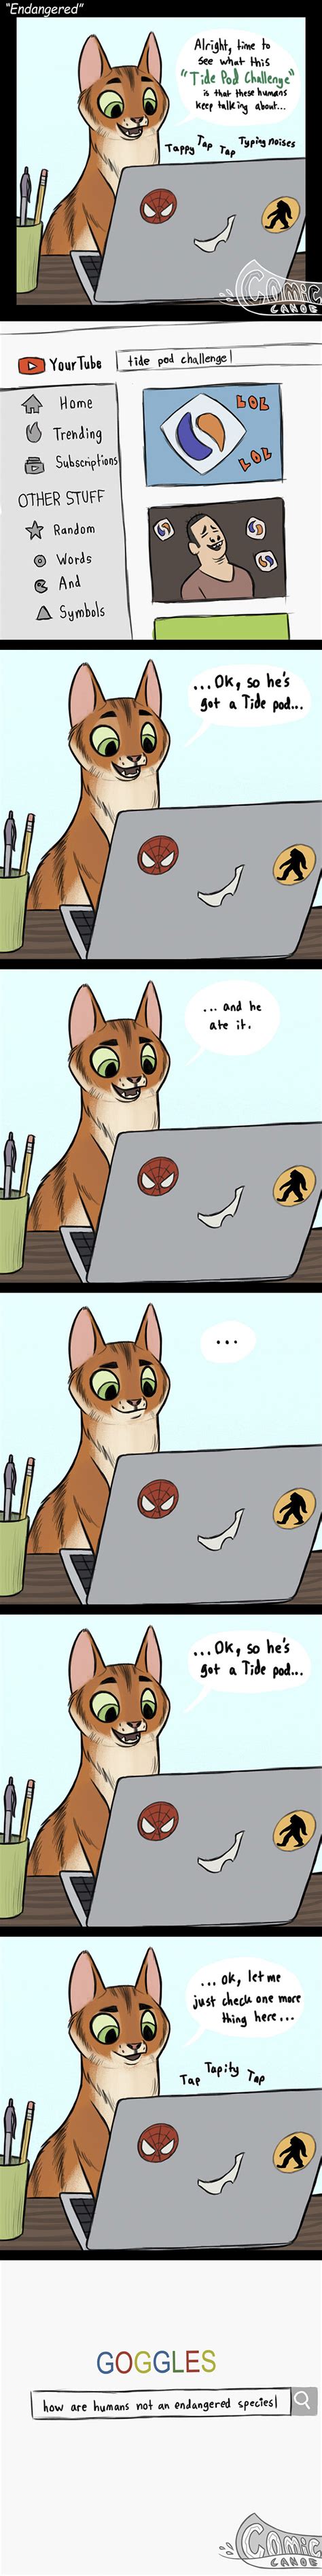 30 Funny Comics About Animals By Pet Foolery Bored Panda